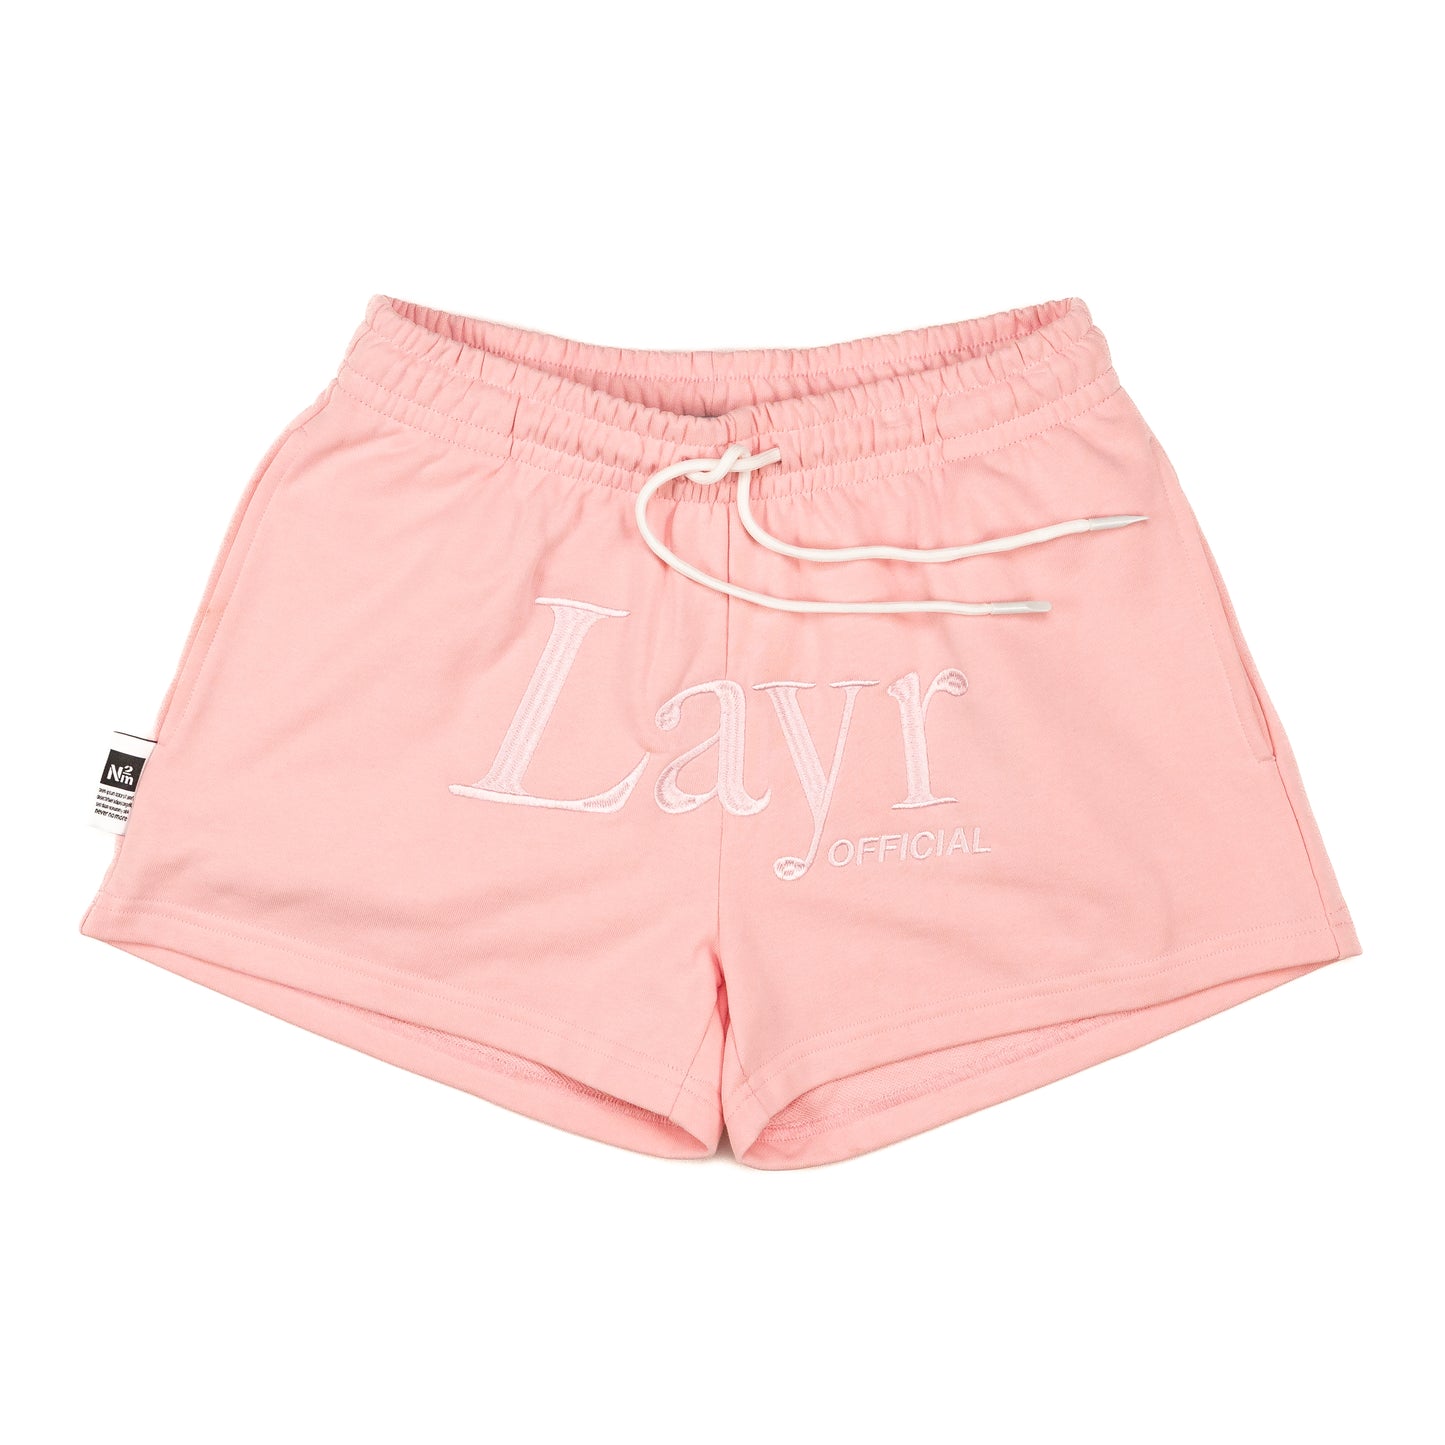 Womens Layr Official Crop Short, Pink - Layr Official